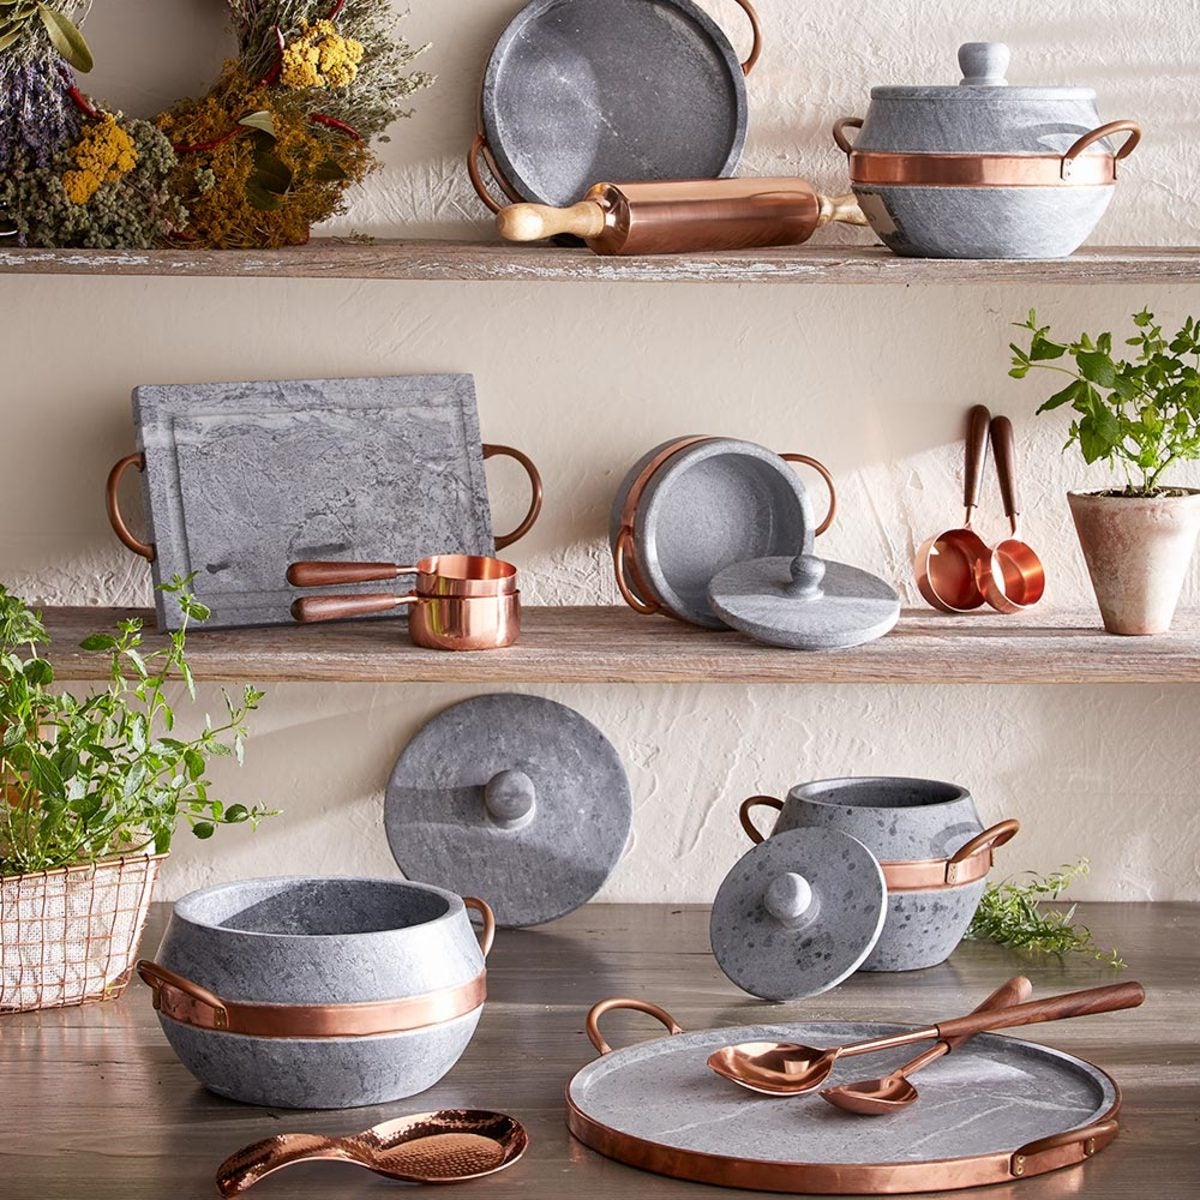 Soapstone Cookware - Essential Traditions by Kayal